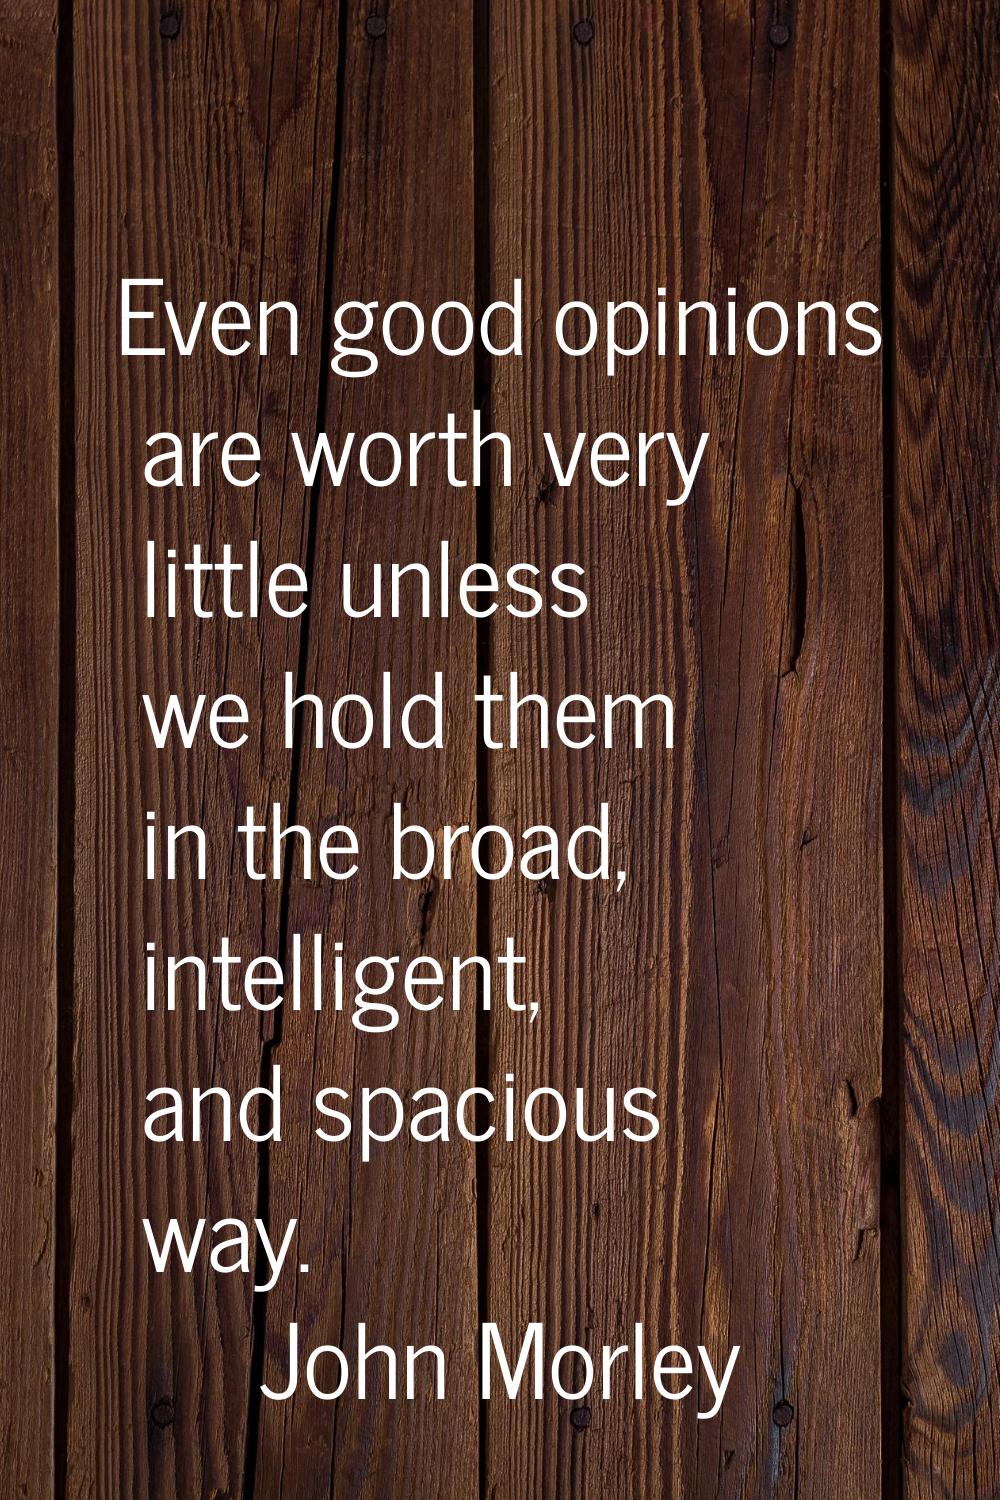 Even good opinions are worth very little unless we hold them in the broad, intelligent, and spaciou